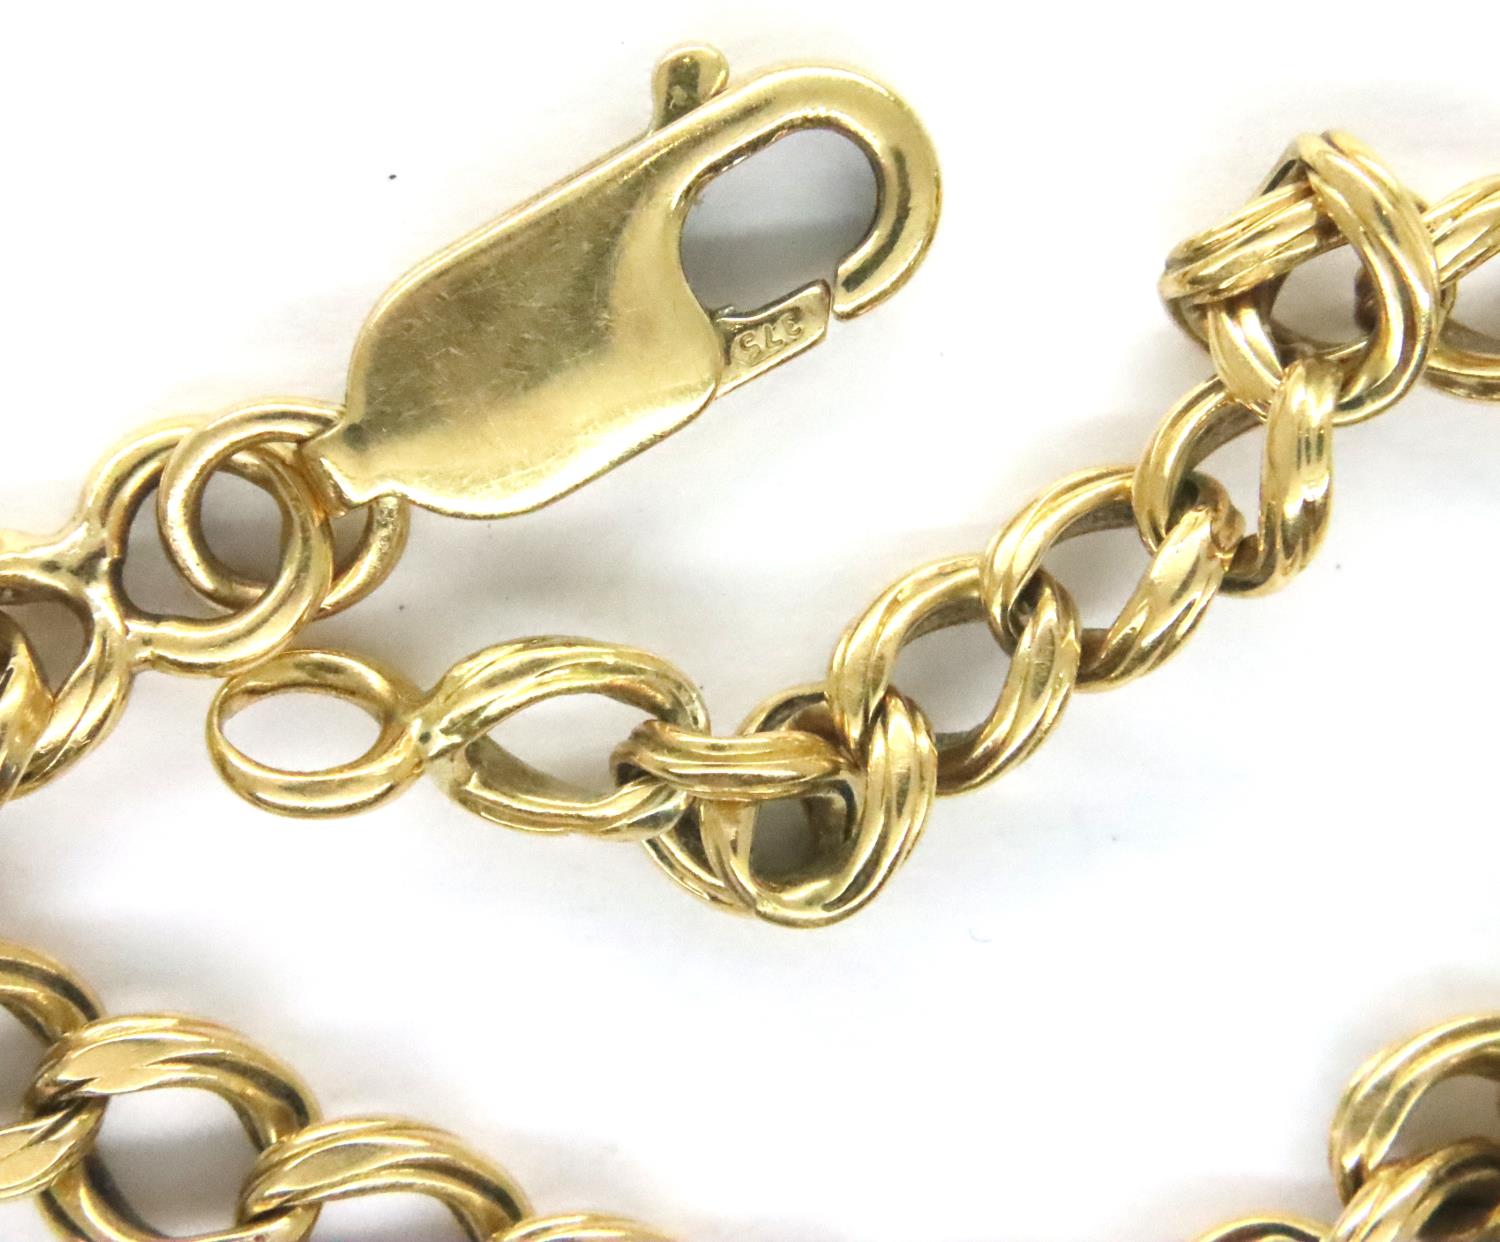 9ct gold bracelet, L: 20 cm, 10.0g. P&P Group 1 (£14+VAT for the first lot and £1+VAT for subsequent - Image 2 of 3